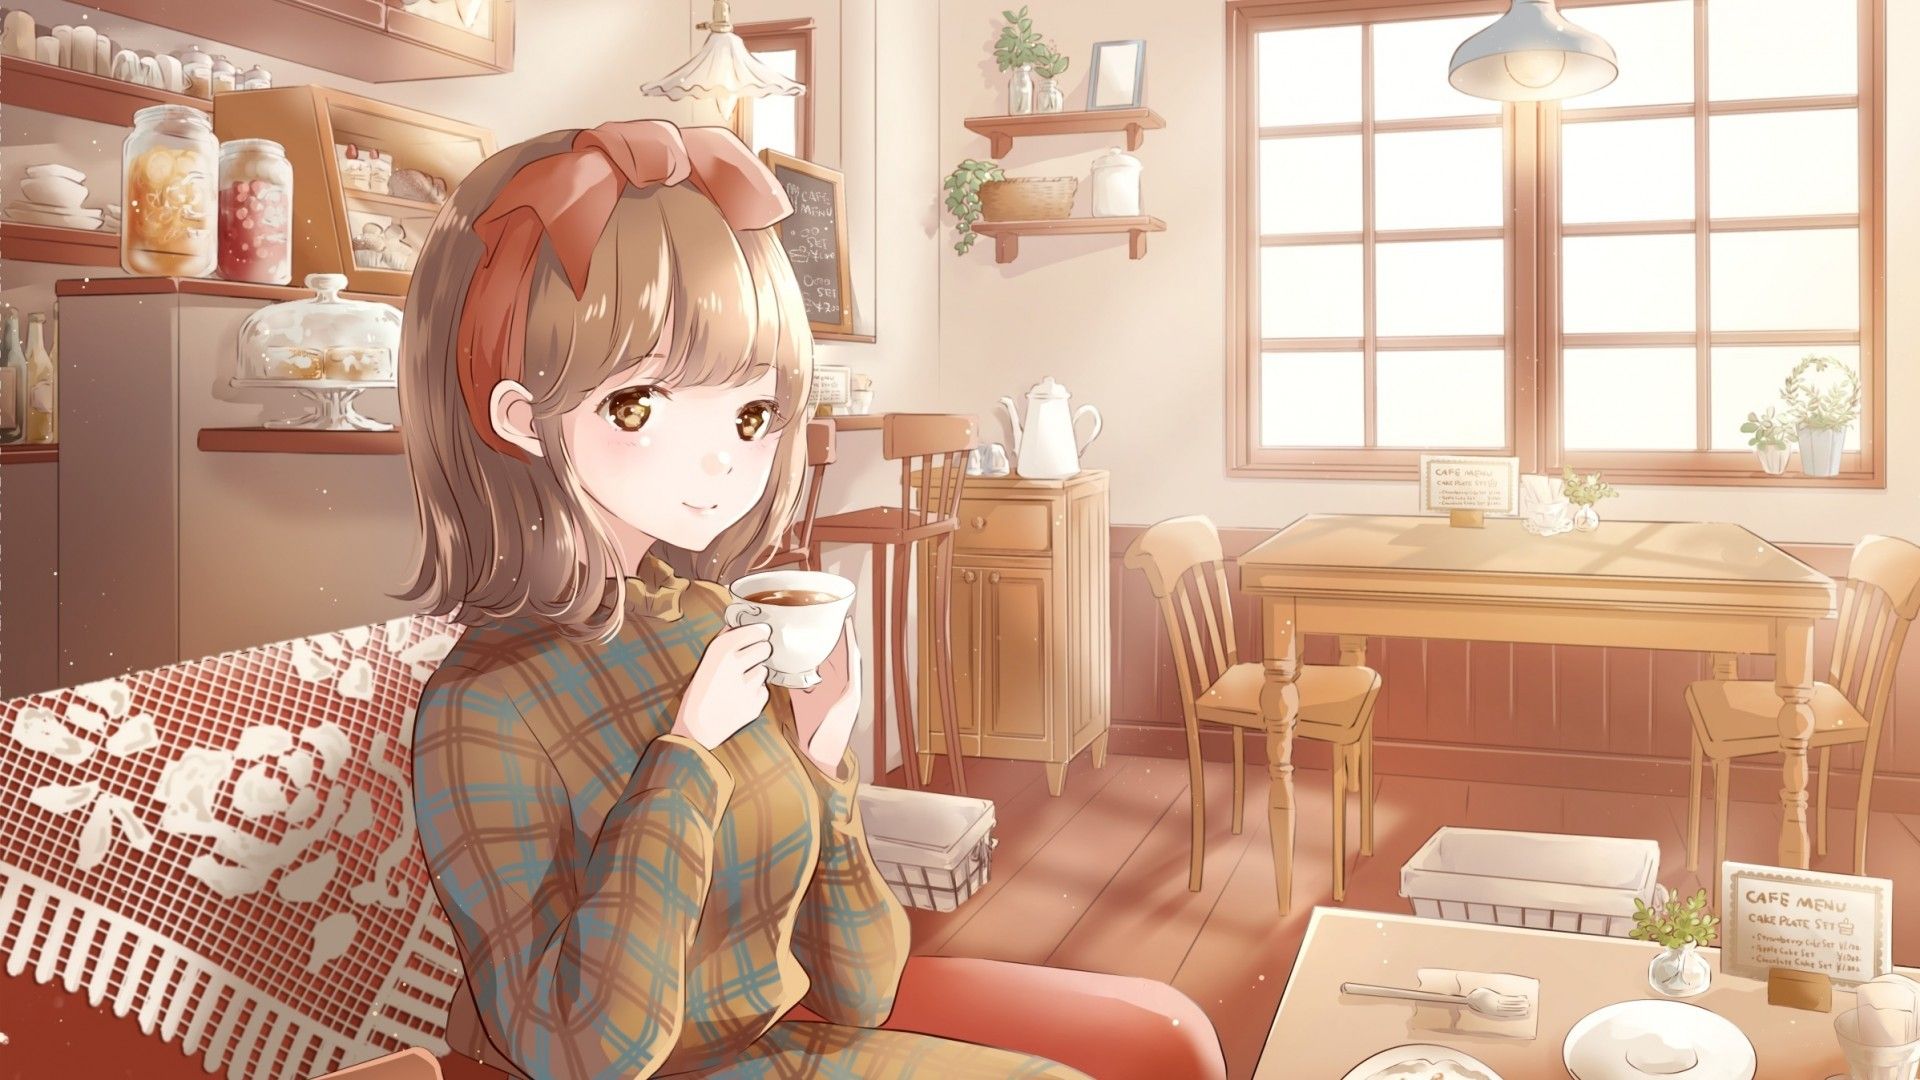 Download 1920x1080 Anime Girl, Cozy Coffee Shop, Drinks, Smiling